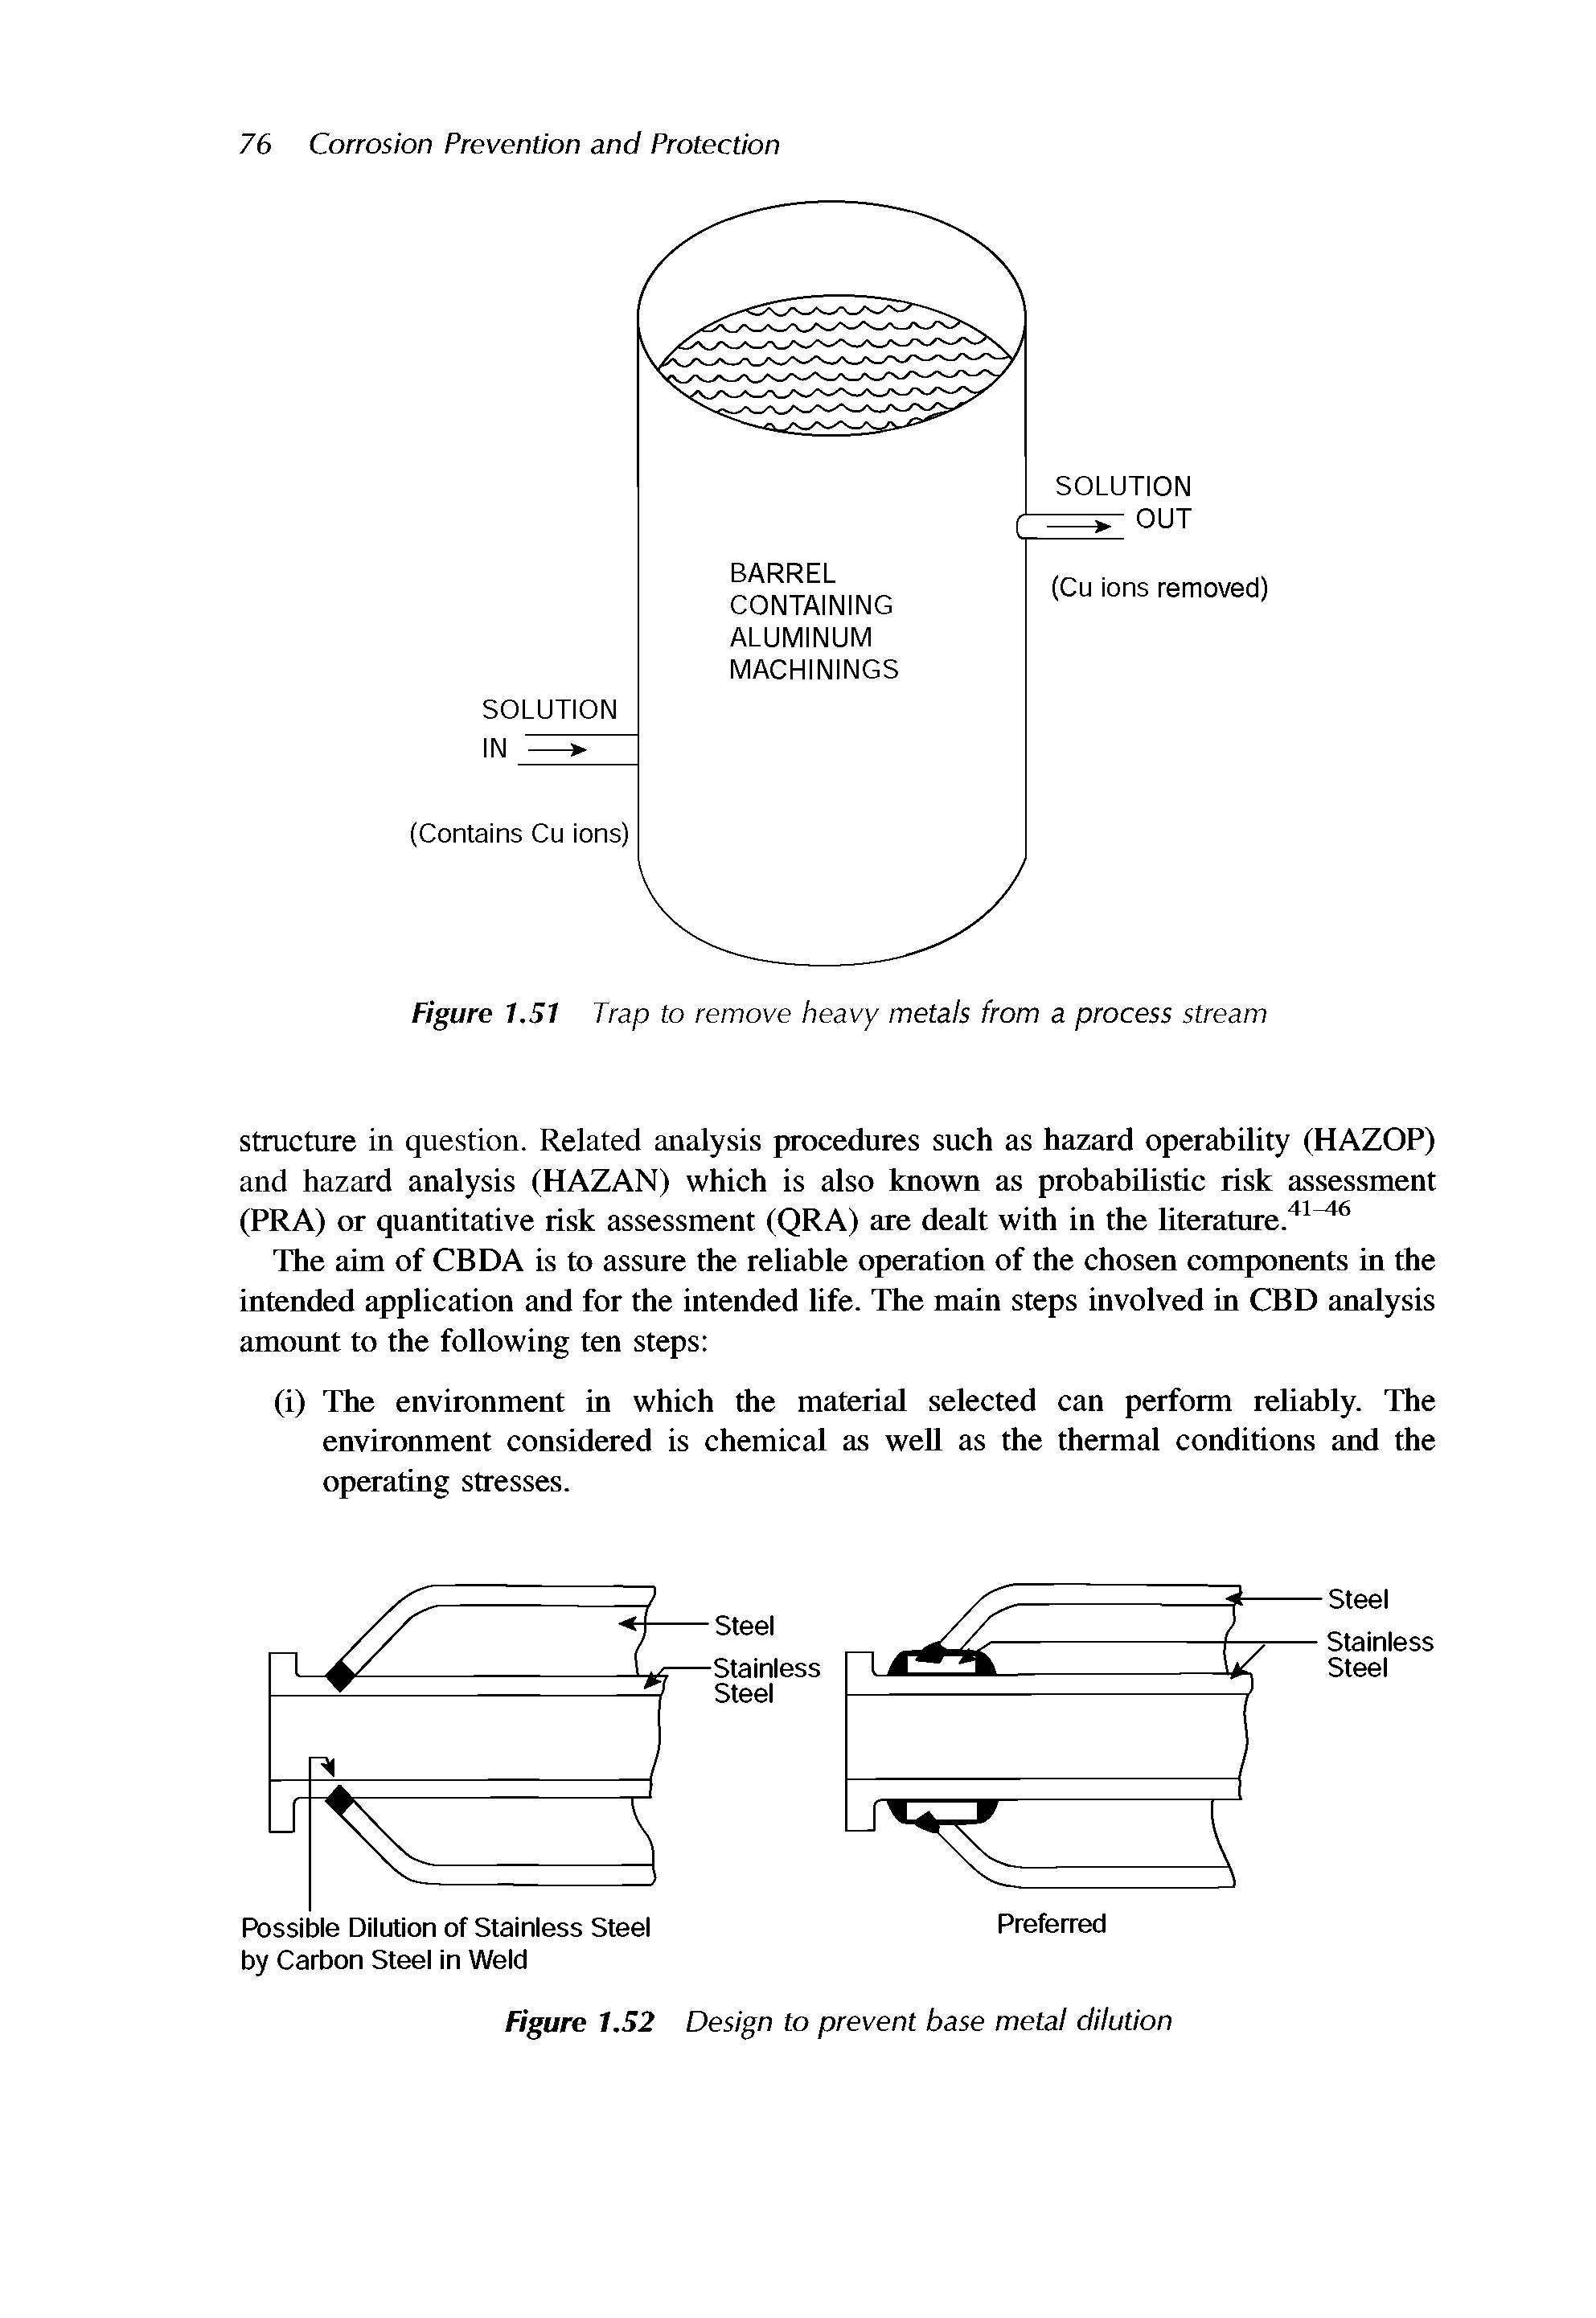 Figure 1.52 Design to prevent base metal dilution...